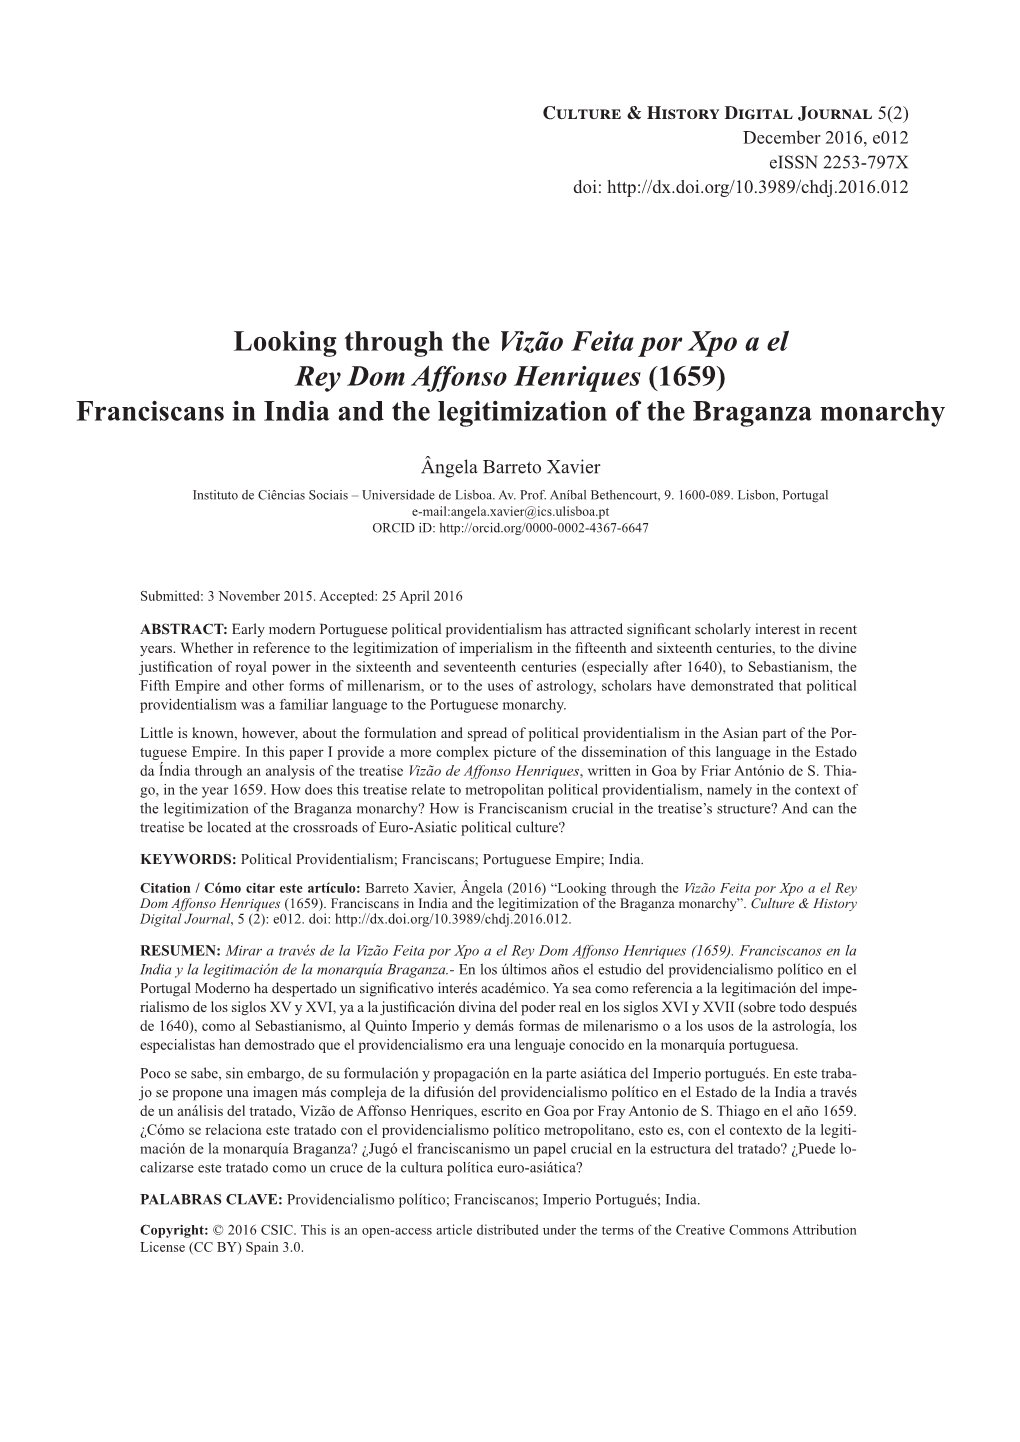 Franciscans in India and the Legitimization of the Braganza Monarchy